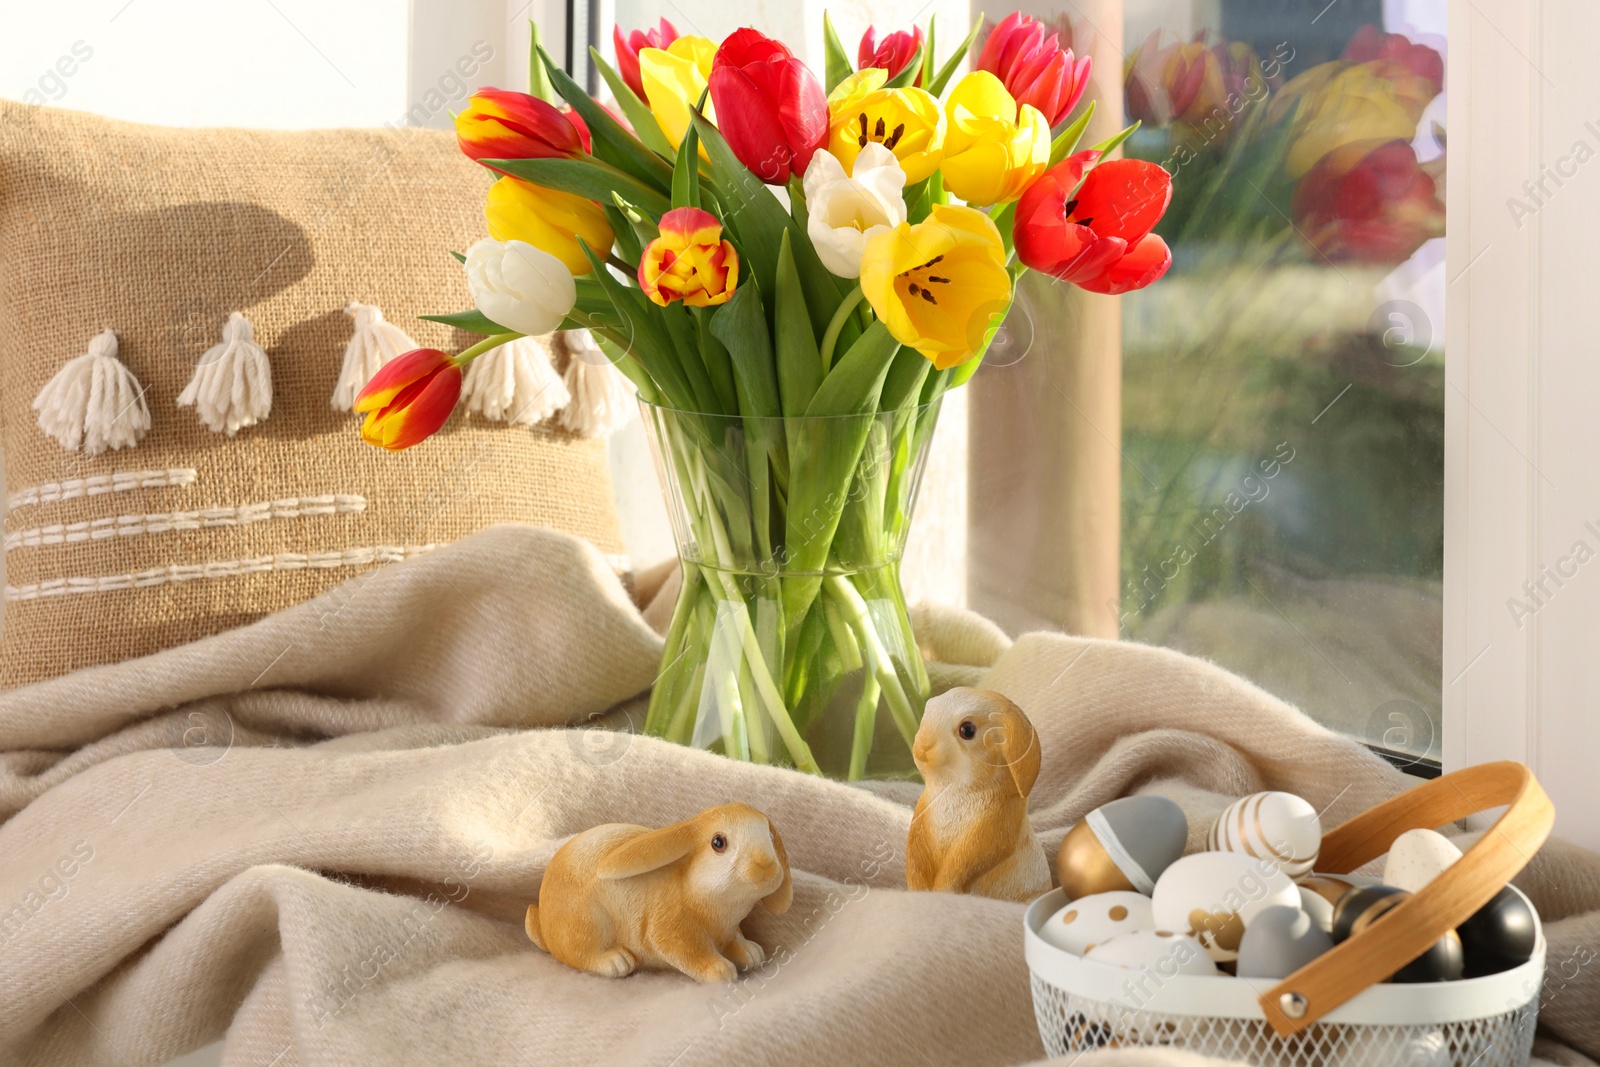 Photo of Easter decorations. Beautiful tulips, basket of painted eggs, bunny figures, pillow and plaid on window sill